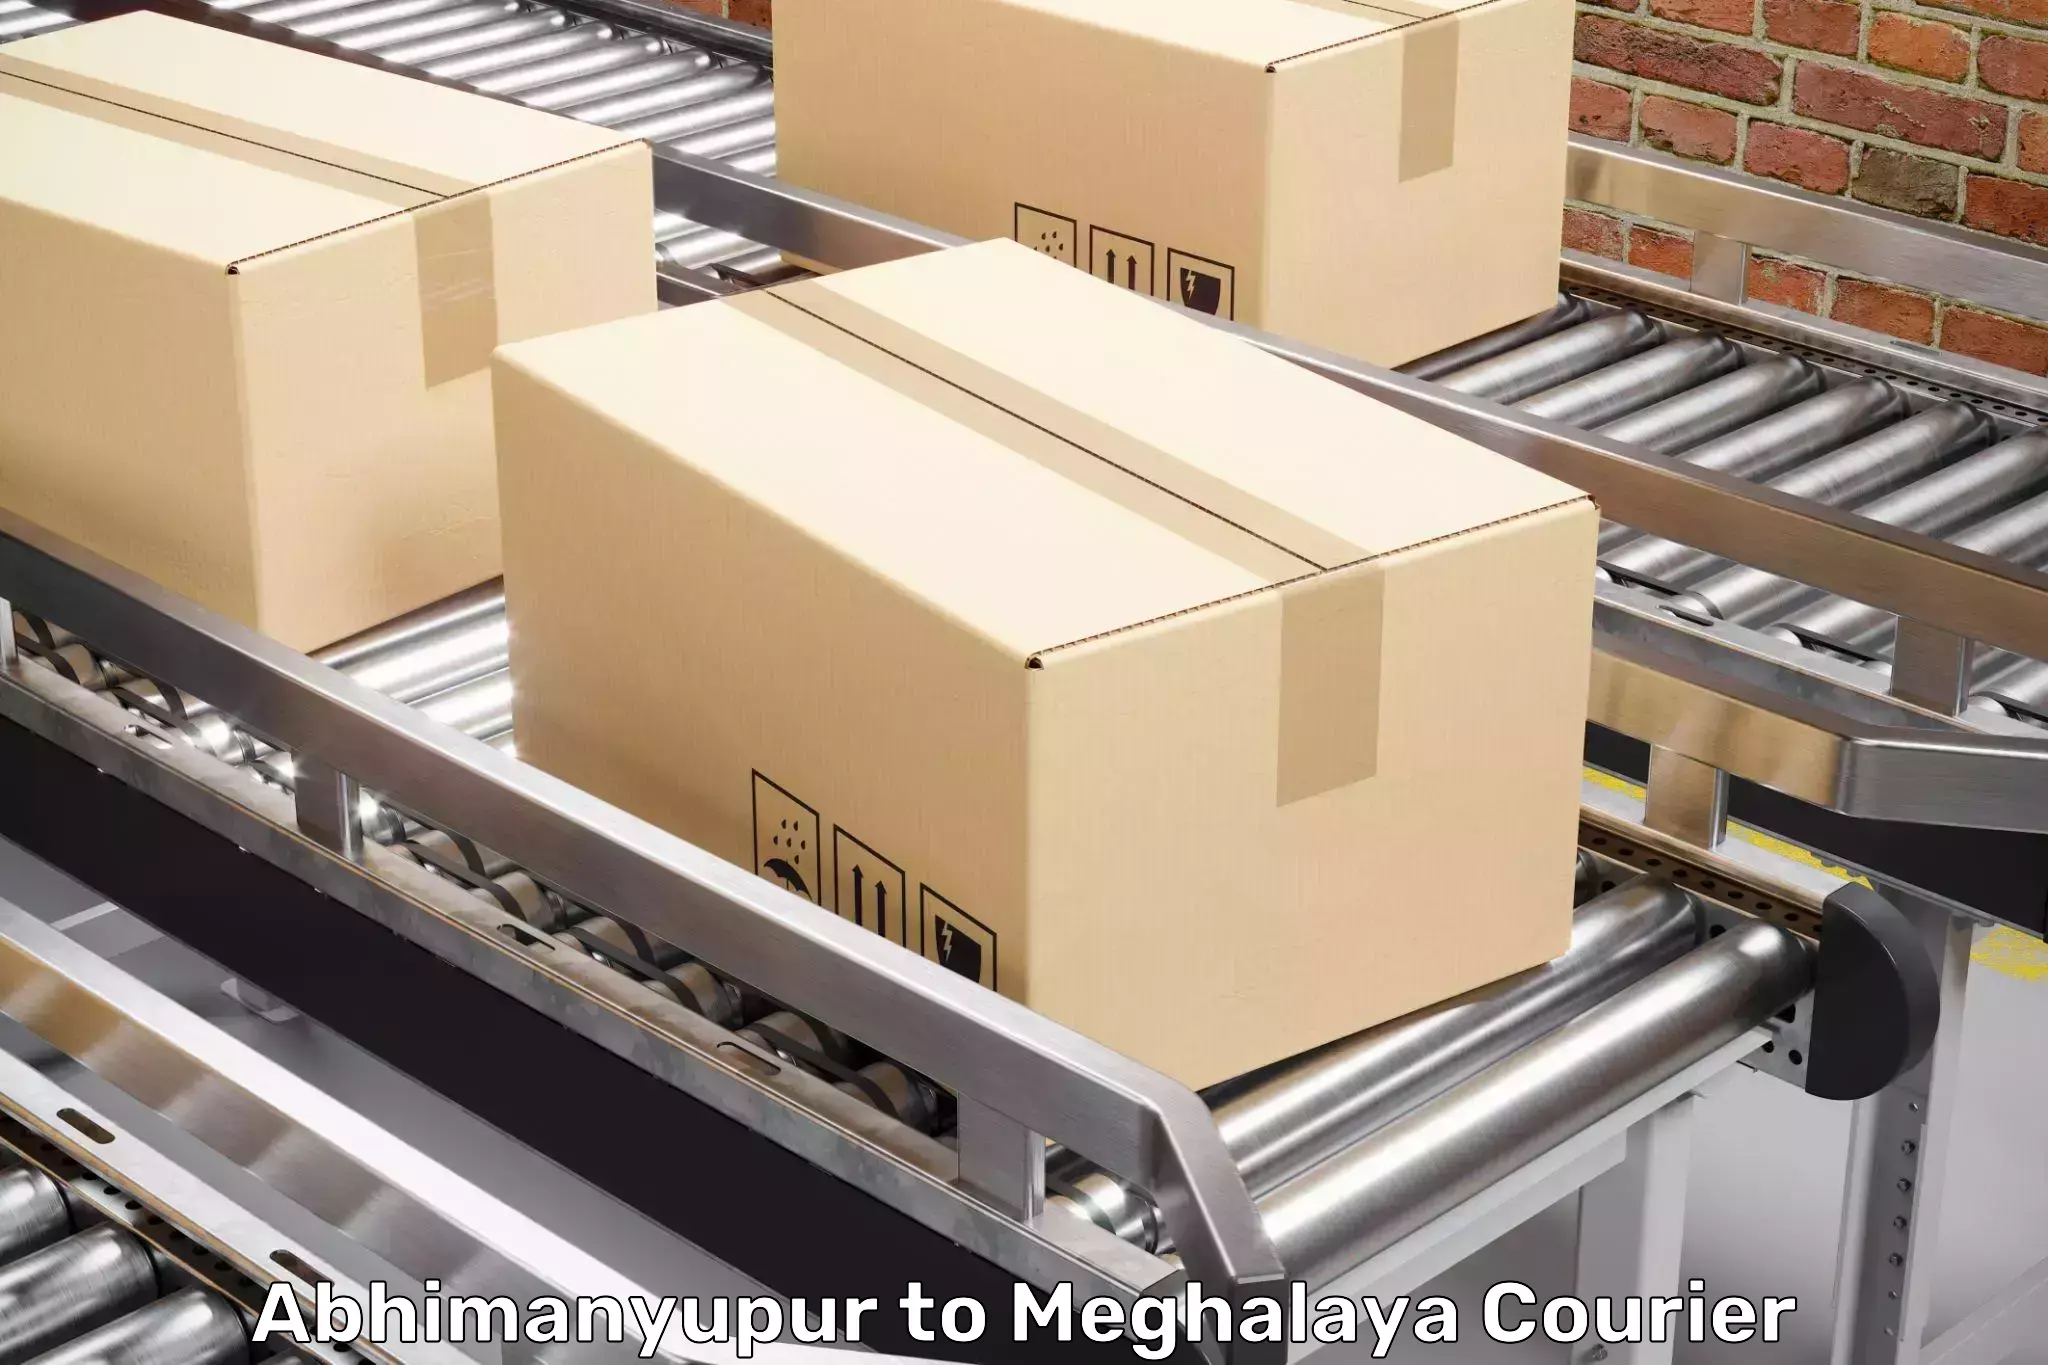 Cost-effective moving options Abhimanyupur to Garobadha